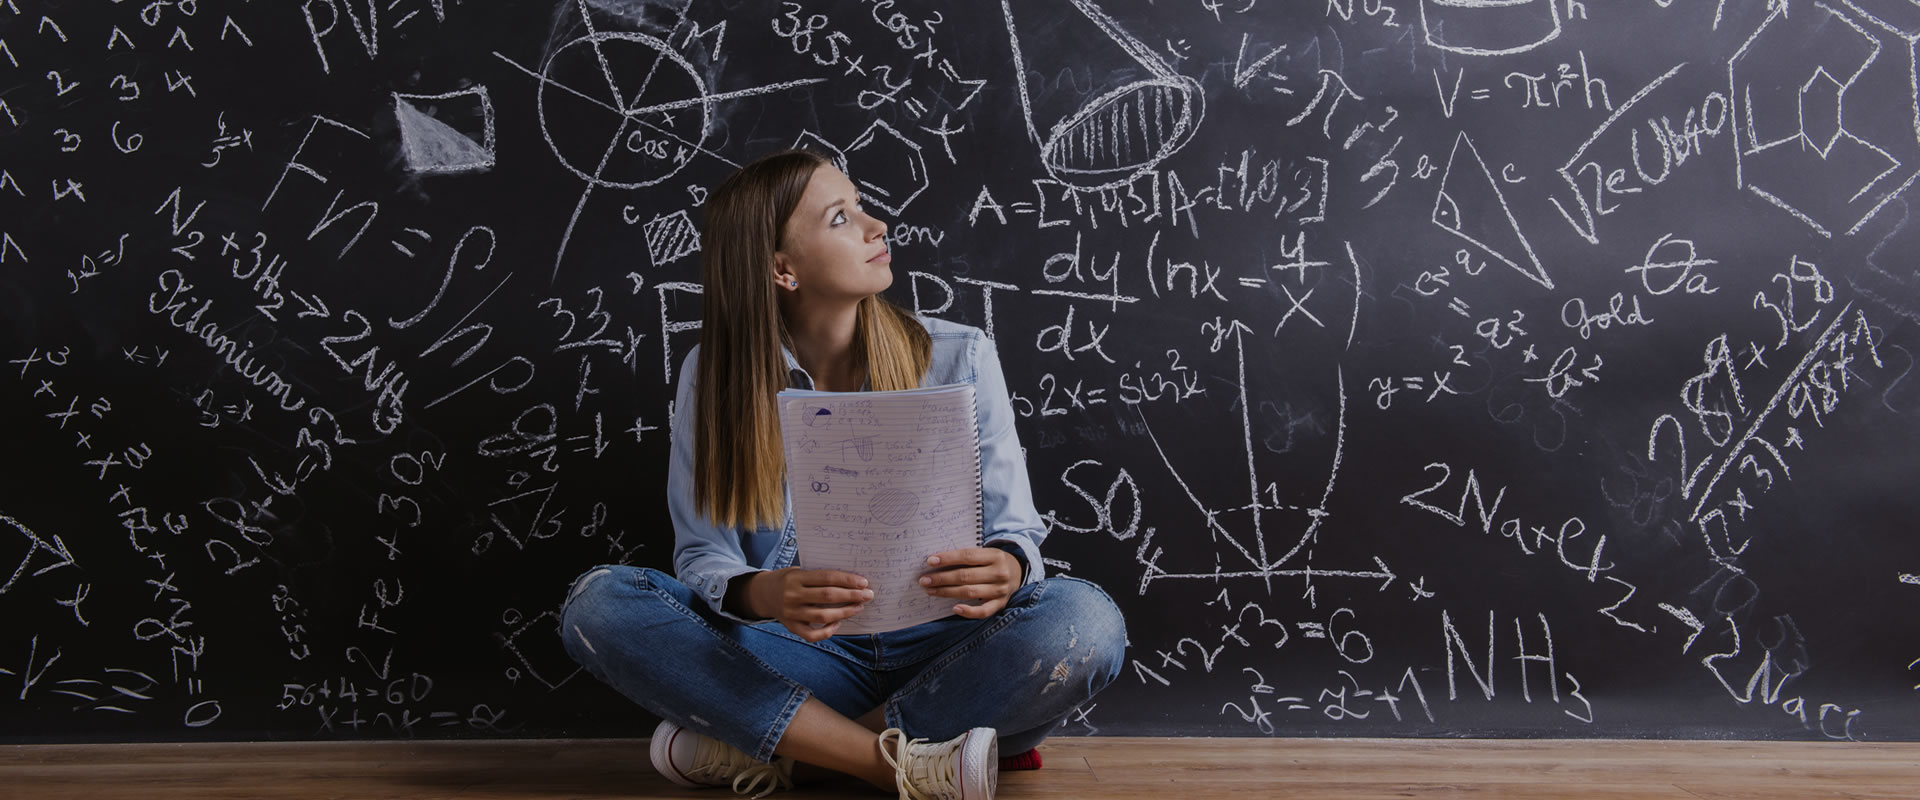 A woman staring at the wrintings on the black board